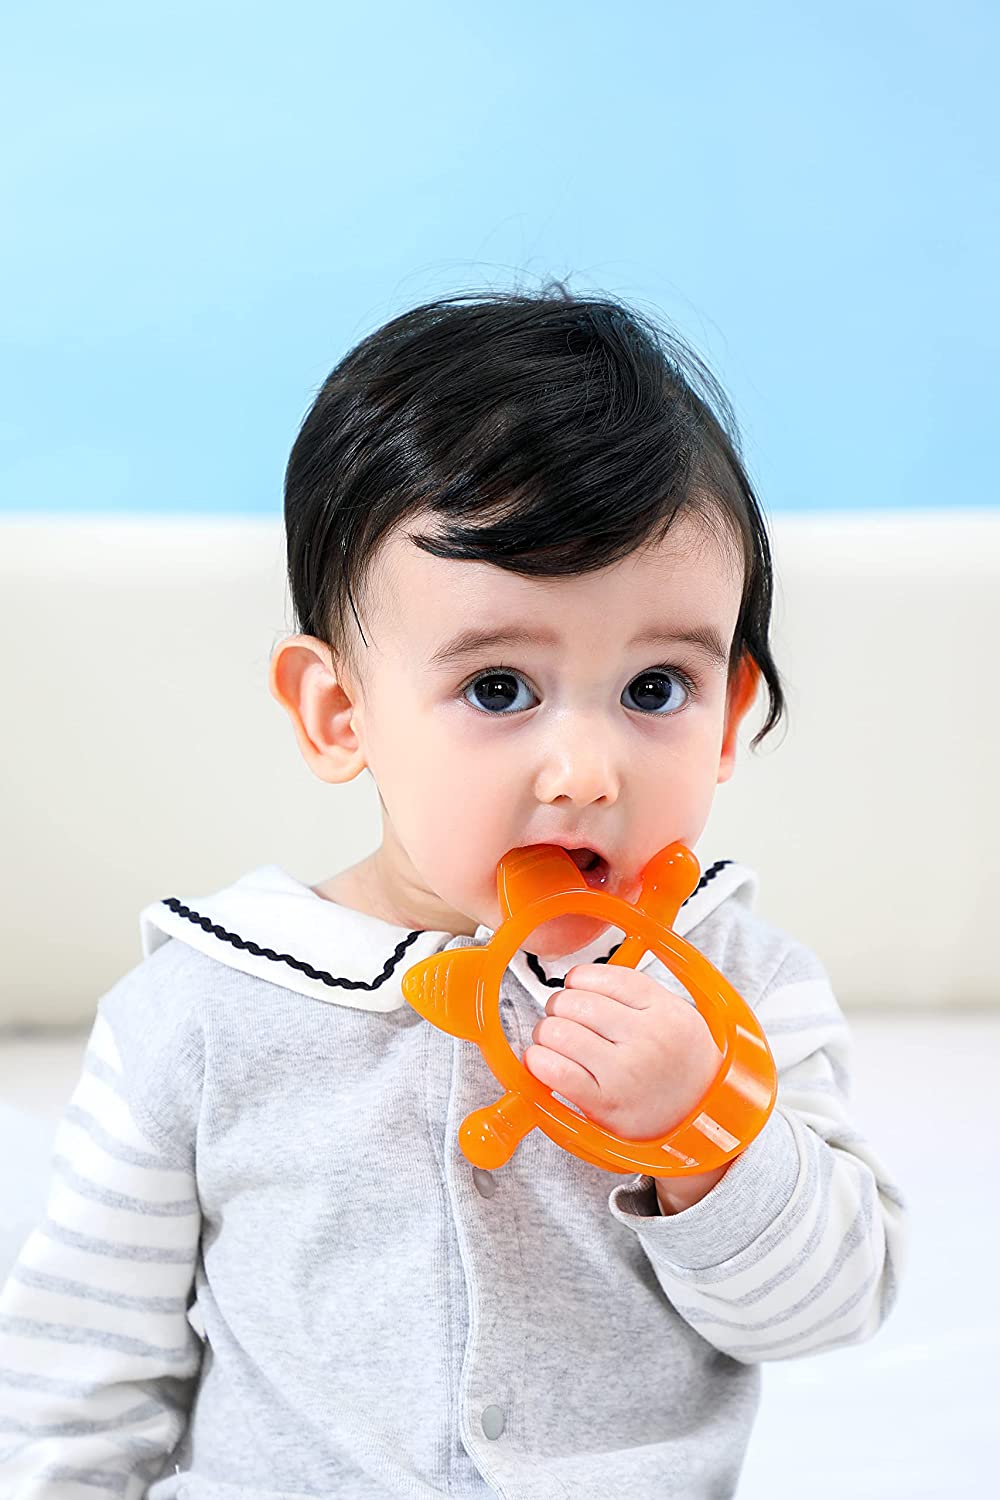 COZYPANDA Baby Teething Toys, Baby Teether, Silicone Chew Toys for Baby  Teething Relief, Anti-Drop Baby Wrist Teether Soothing Pacifiers for 6-12